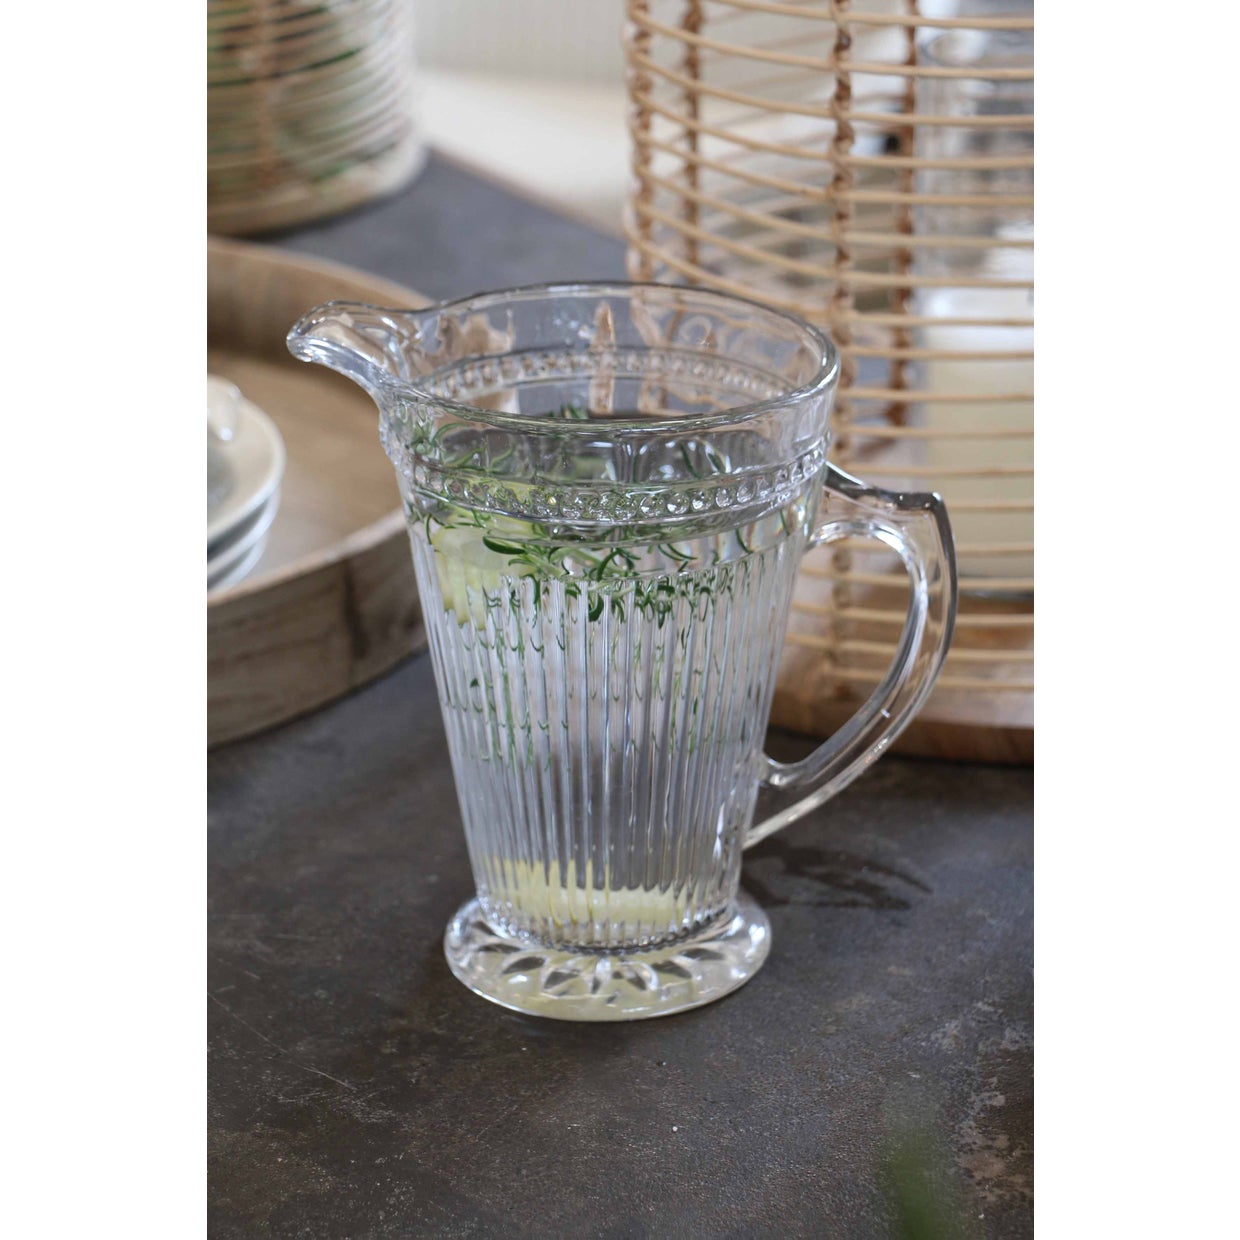 RIBBED WATER JUG CLEAR SPRING SPECIAL